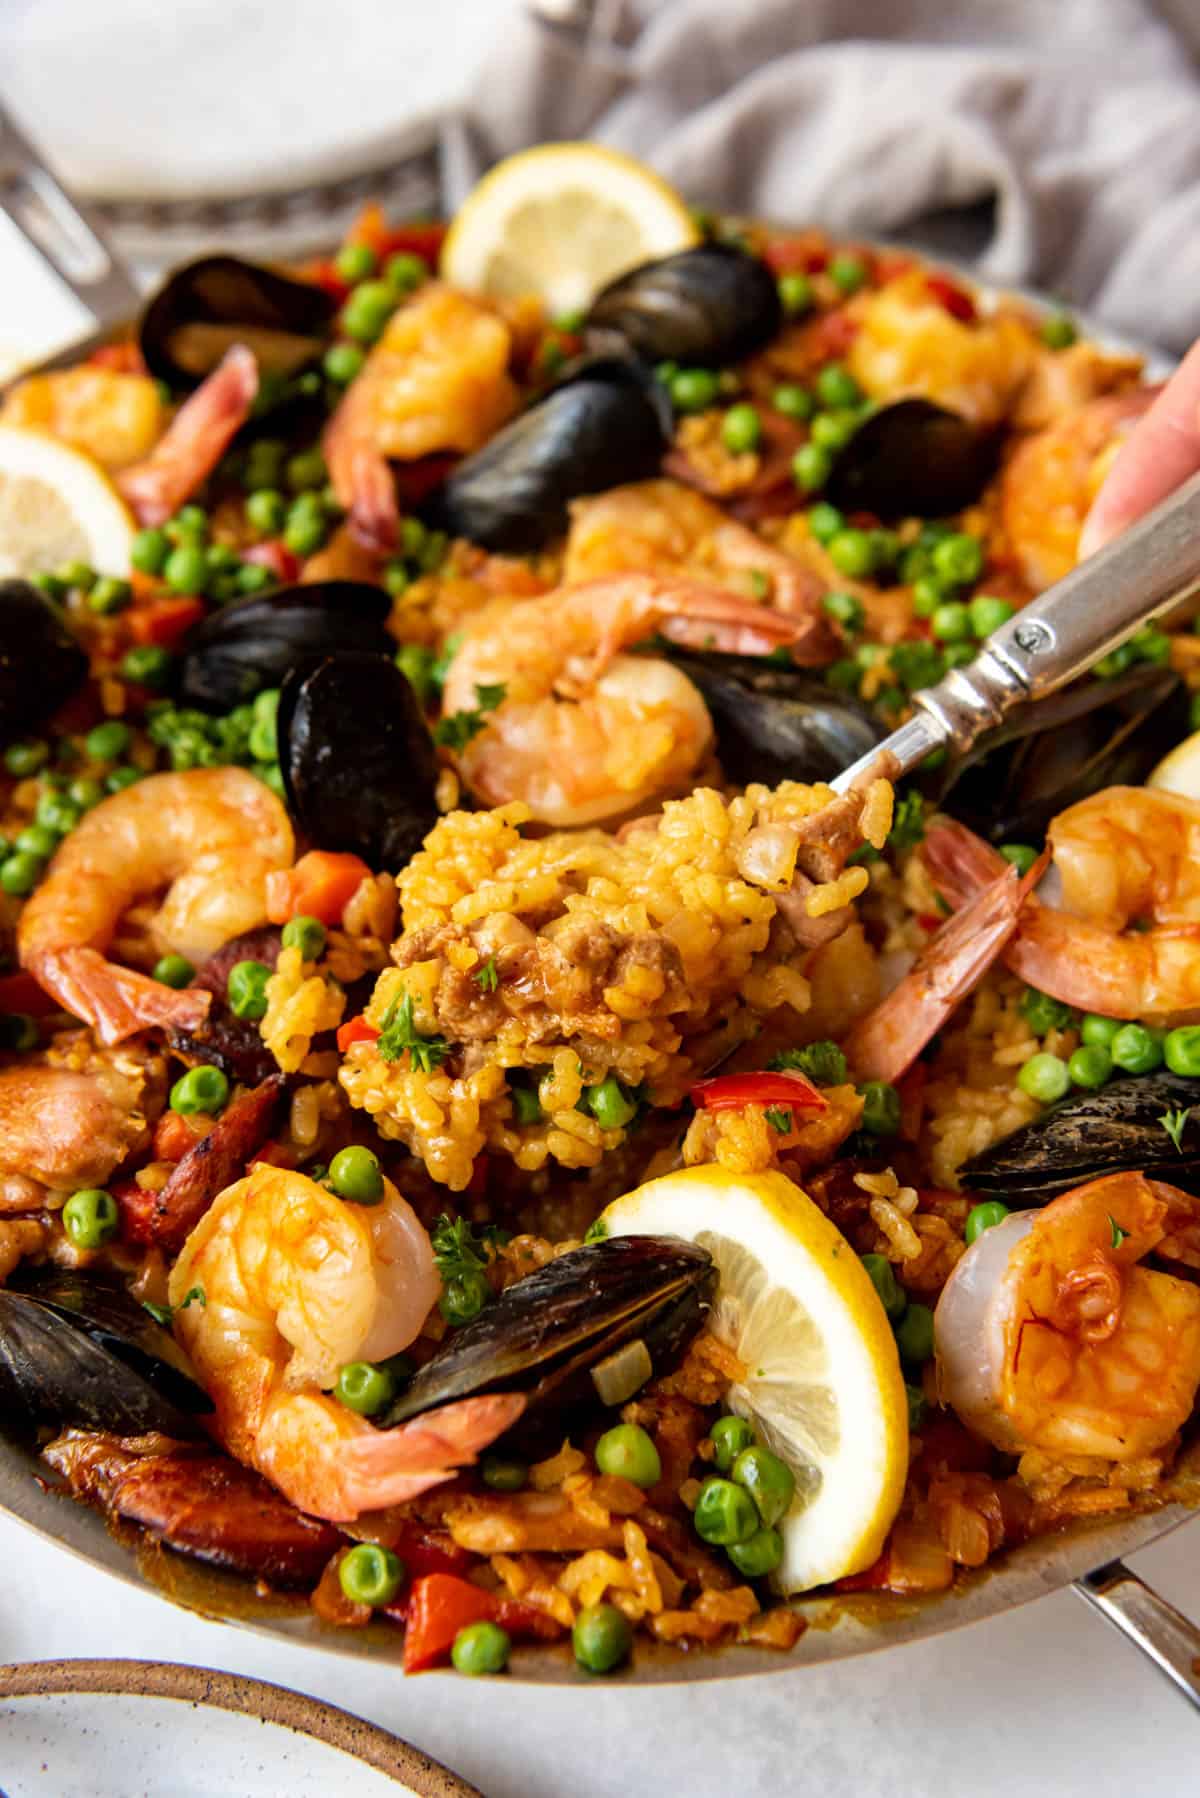 A spoonful of paella being lifted from the pan.